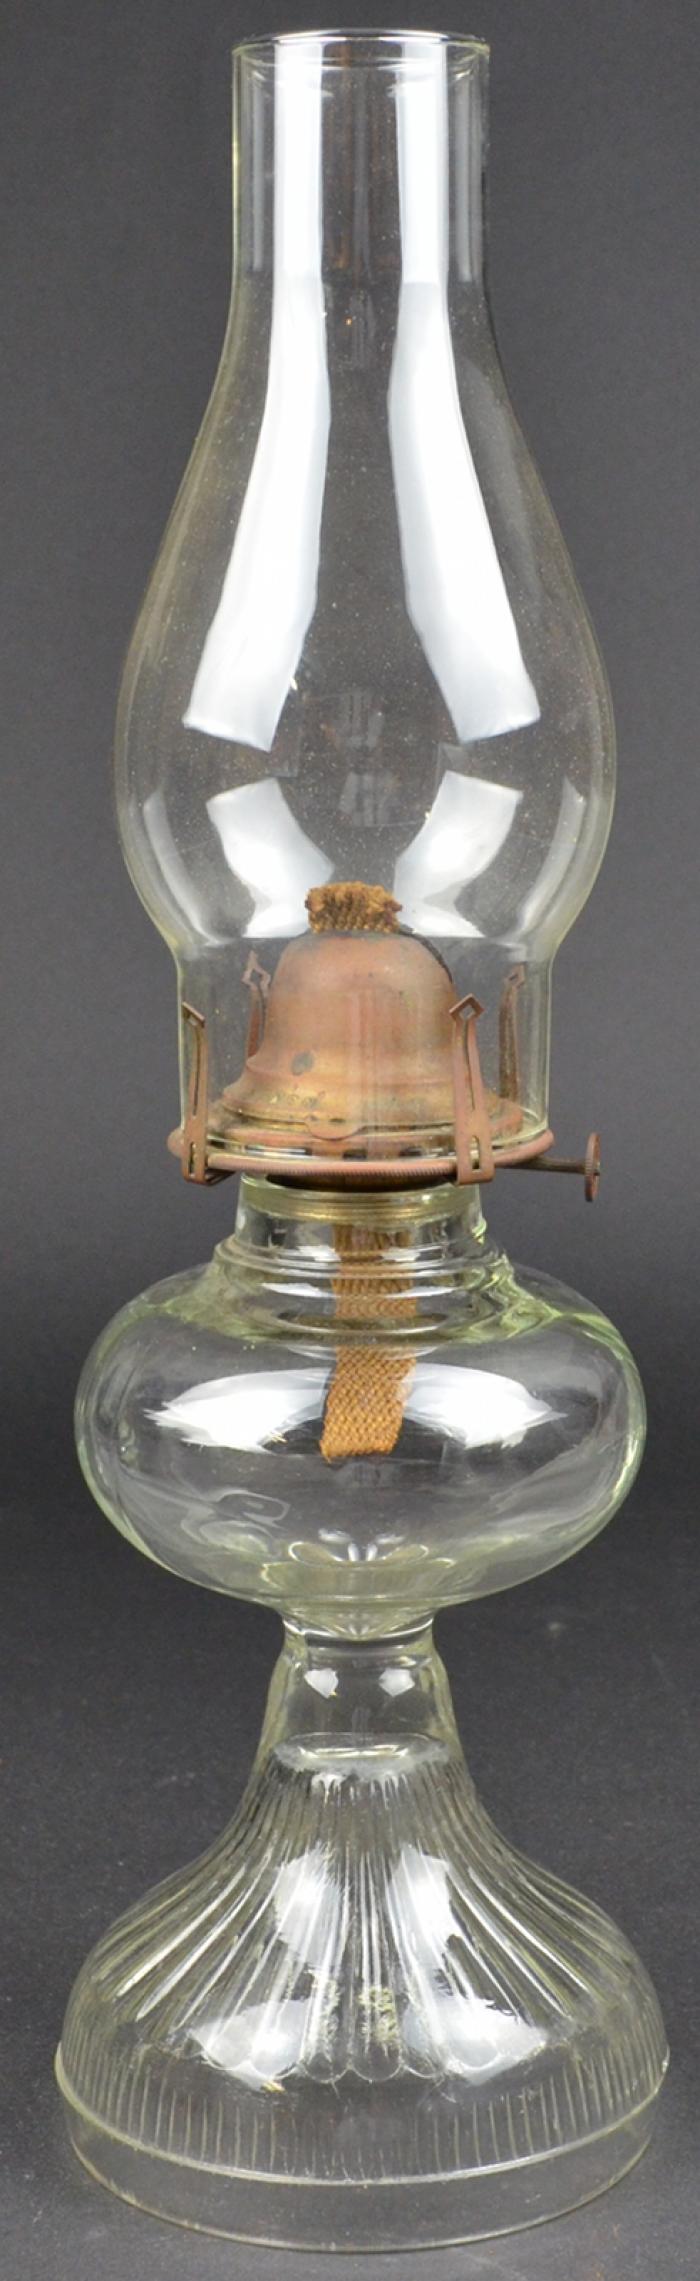 http://old.tgldirect.com/product_files/170400410000/clear-glass-kerosene-oil-lamp-and-chimney-with-queen-anne-burner-and-wick-0-700.jpg